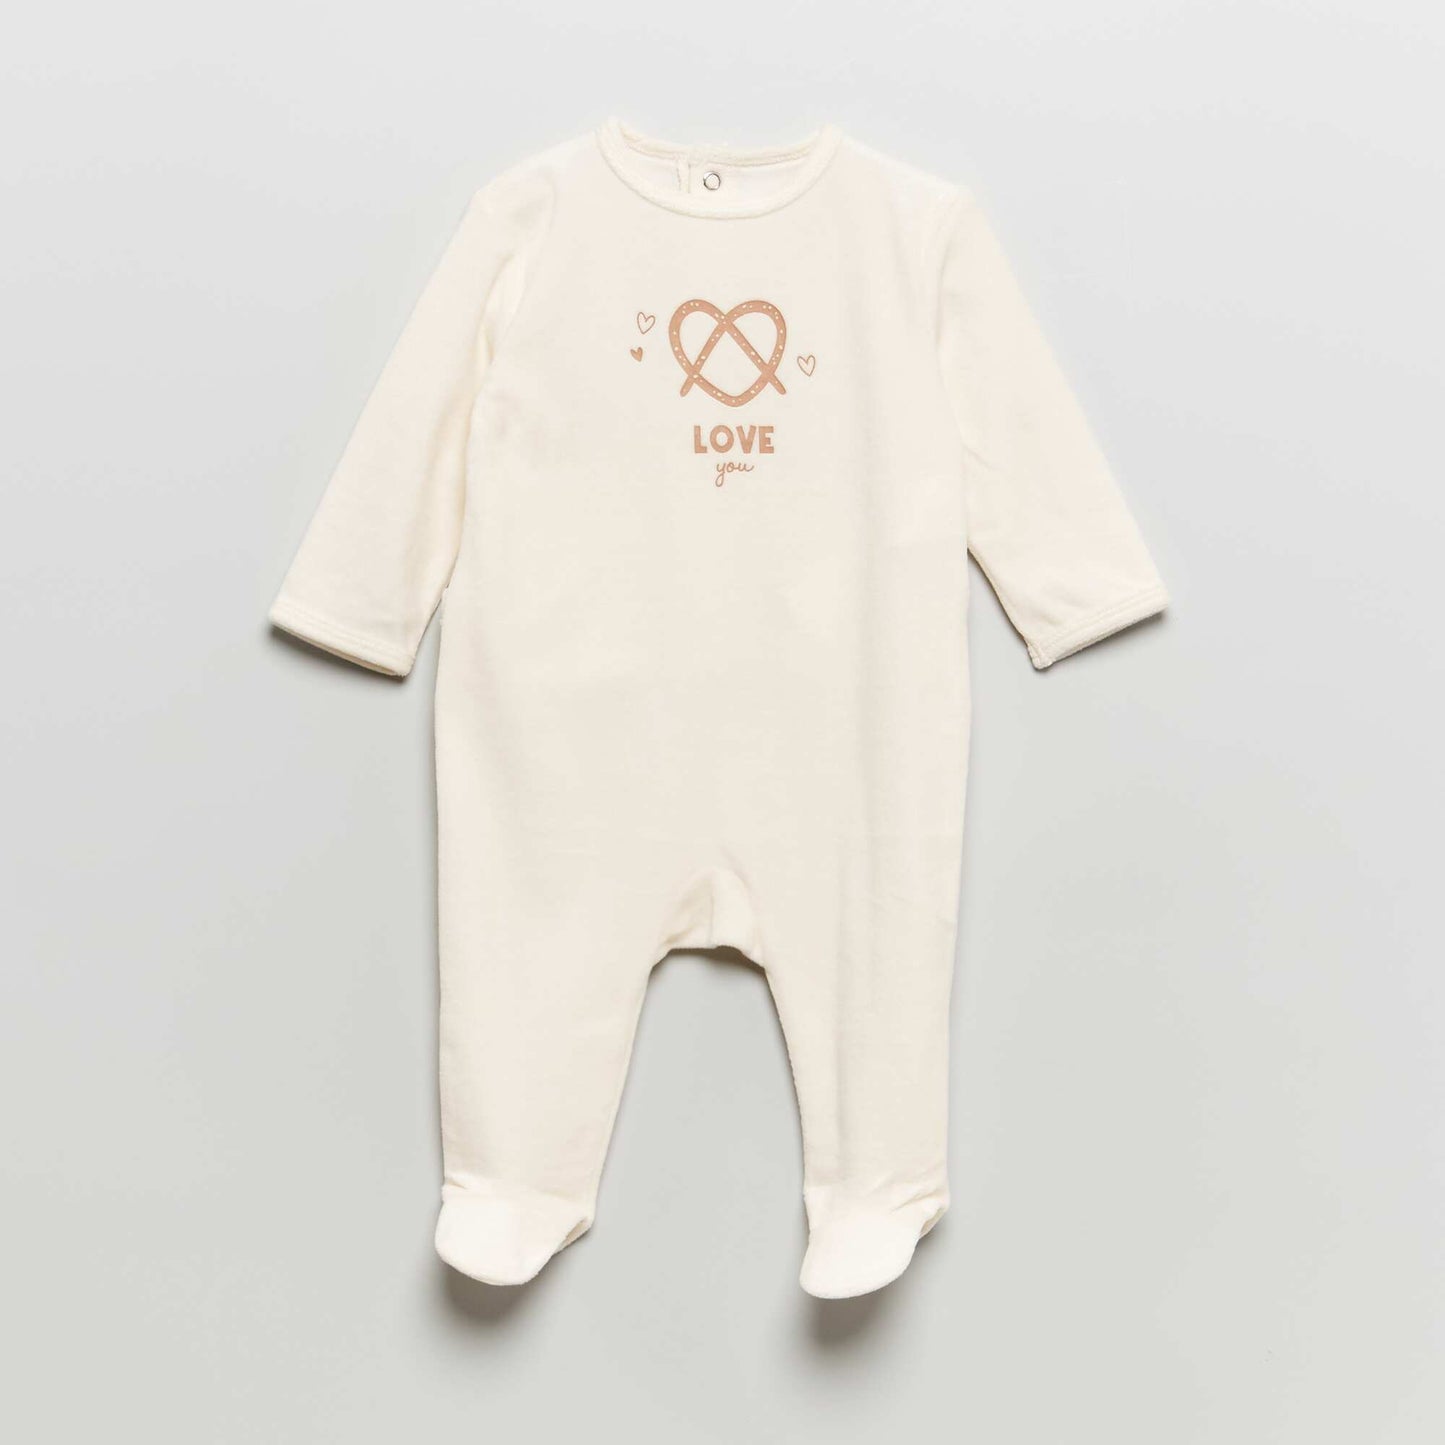 Velour sleepsuit with printed lettering WHITE